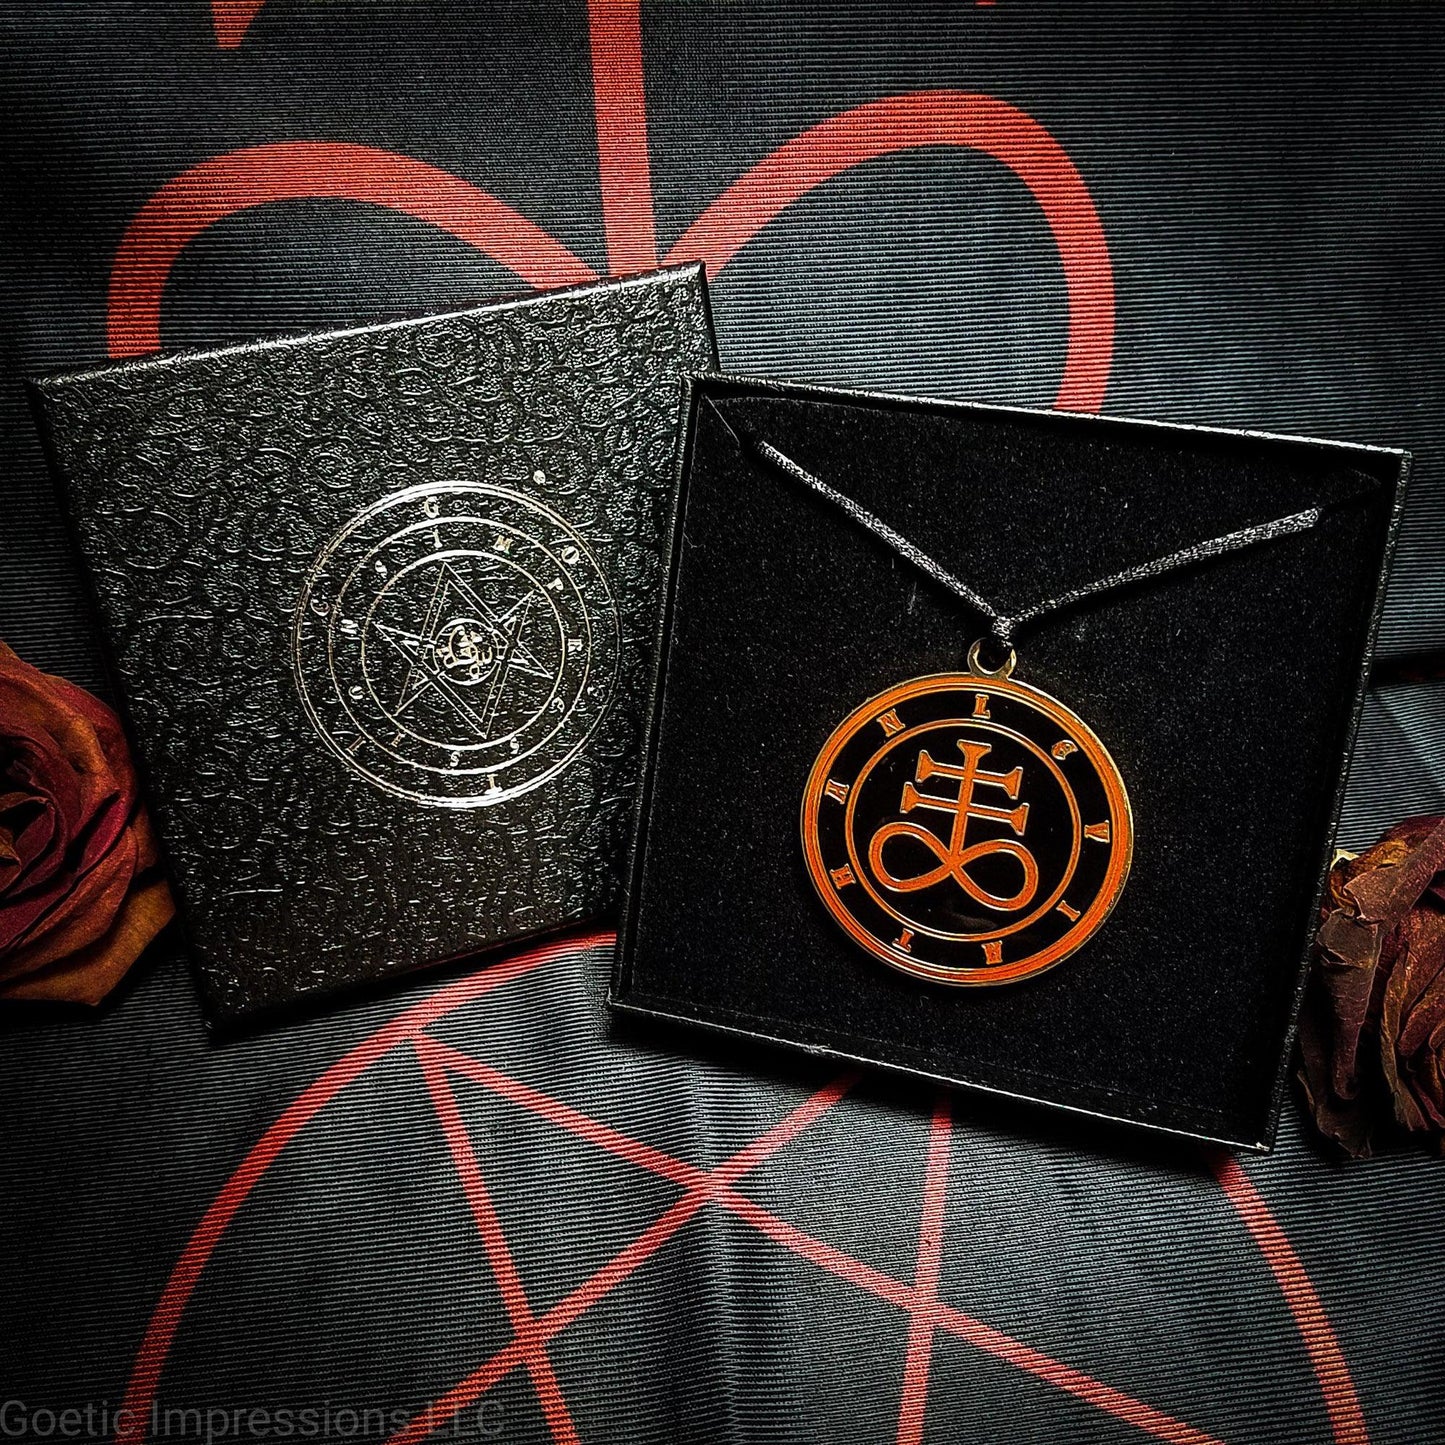 Leviathan seal pendant with gift box